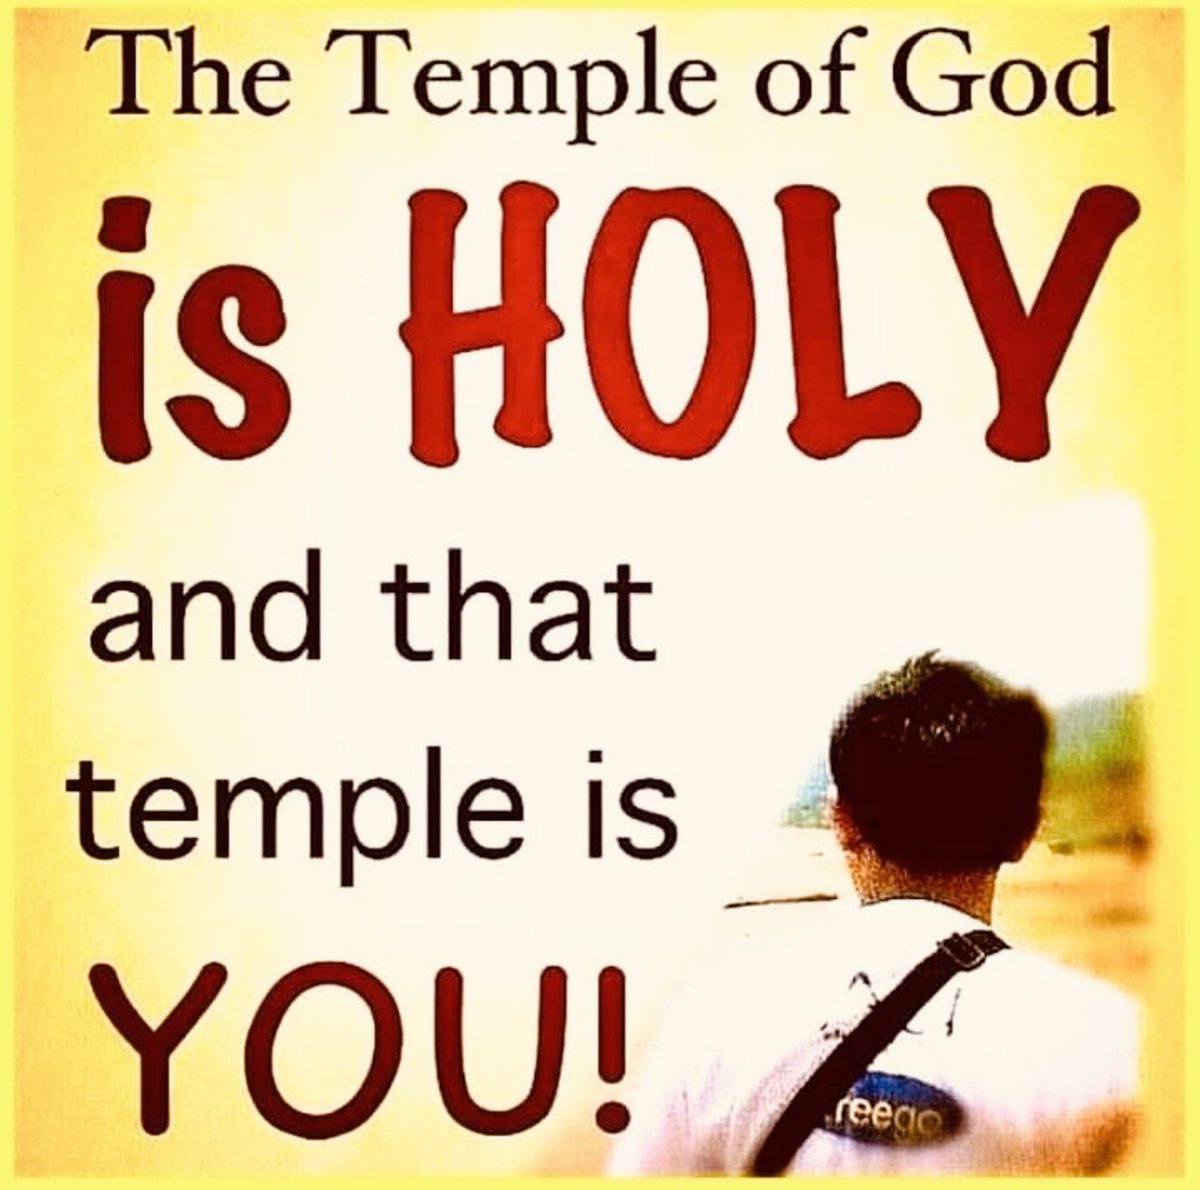 1 Corinthians 3:16-17 “Know ye not that ye are the temple of God, and that the Spirit of God dwelleth in you? If any man defile the temple of God, him shall God destroy; for the temple of God is holy, which temple ye are.”🔥